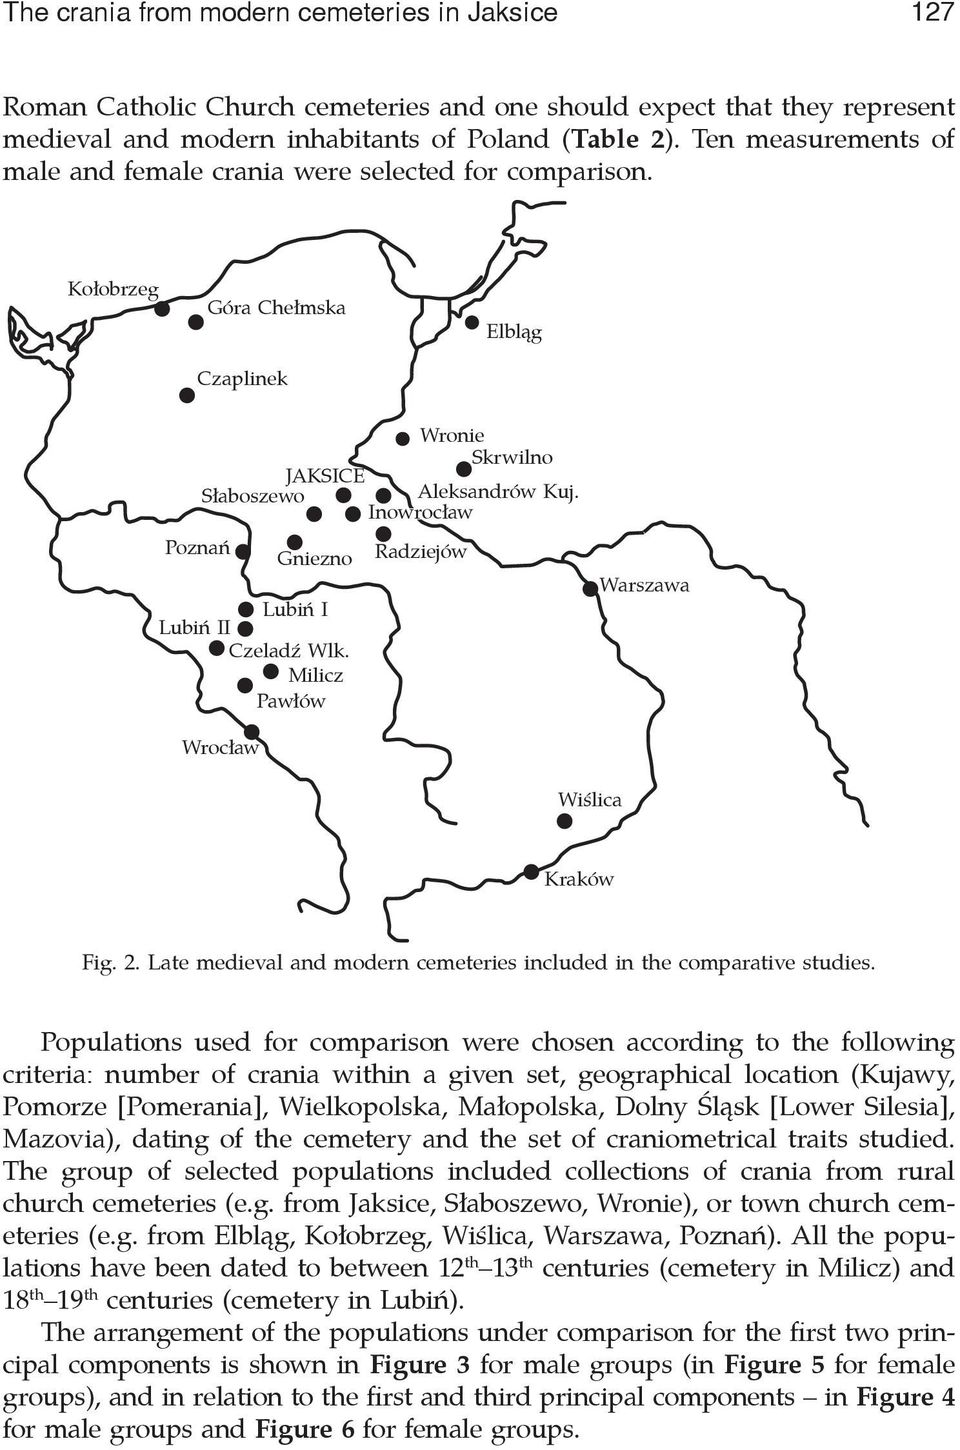 Populations used for comparison were chosen according to the following criteria: number of crania within a given set, geographical location (Kujawy, Pomorze [Pomerania], Wielkopolska, Ma³opolska,